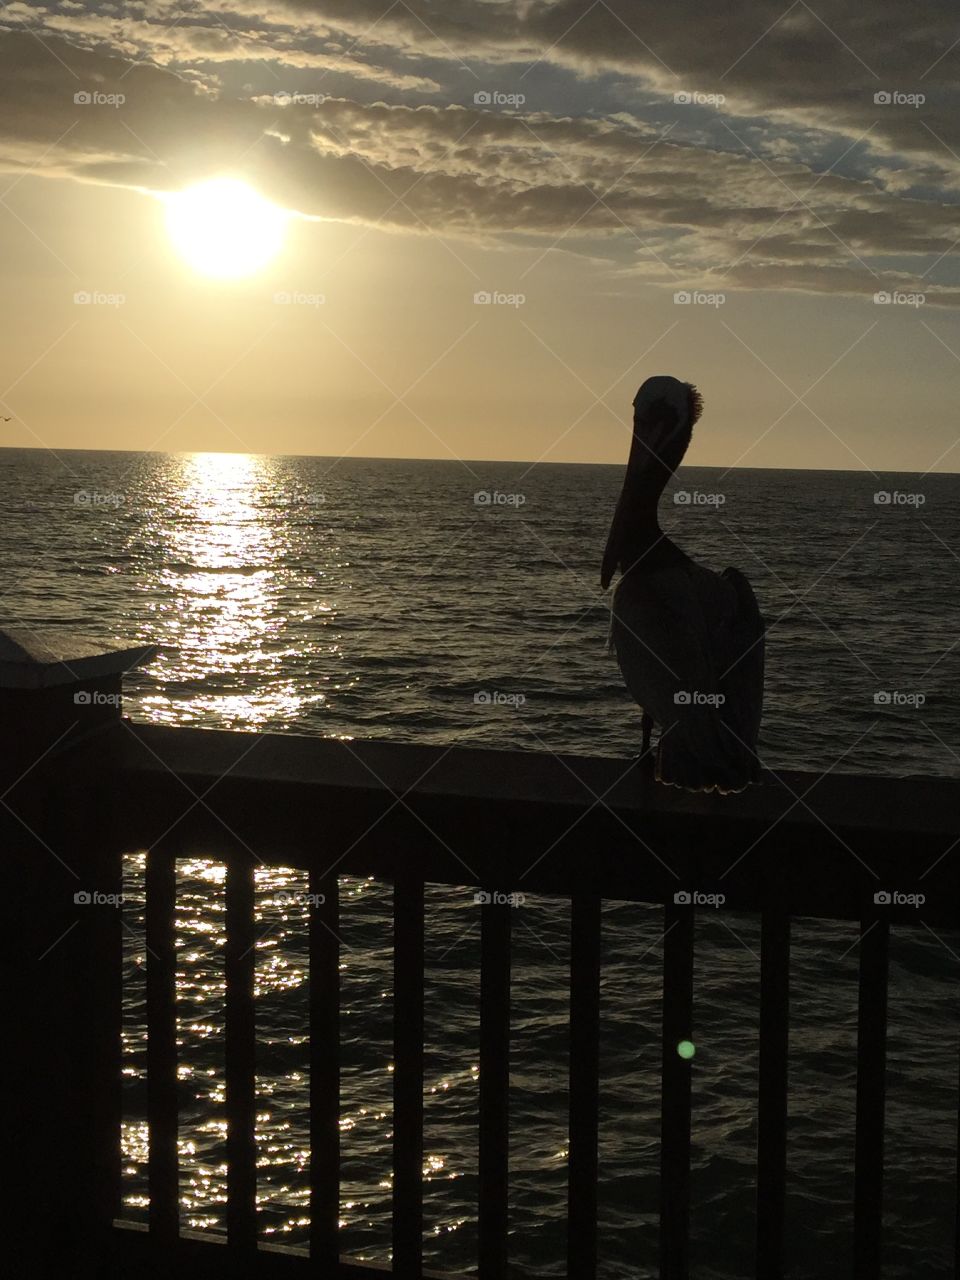 Pelican In A Beautiful Sunset Over The Beach Waters